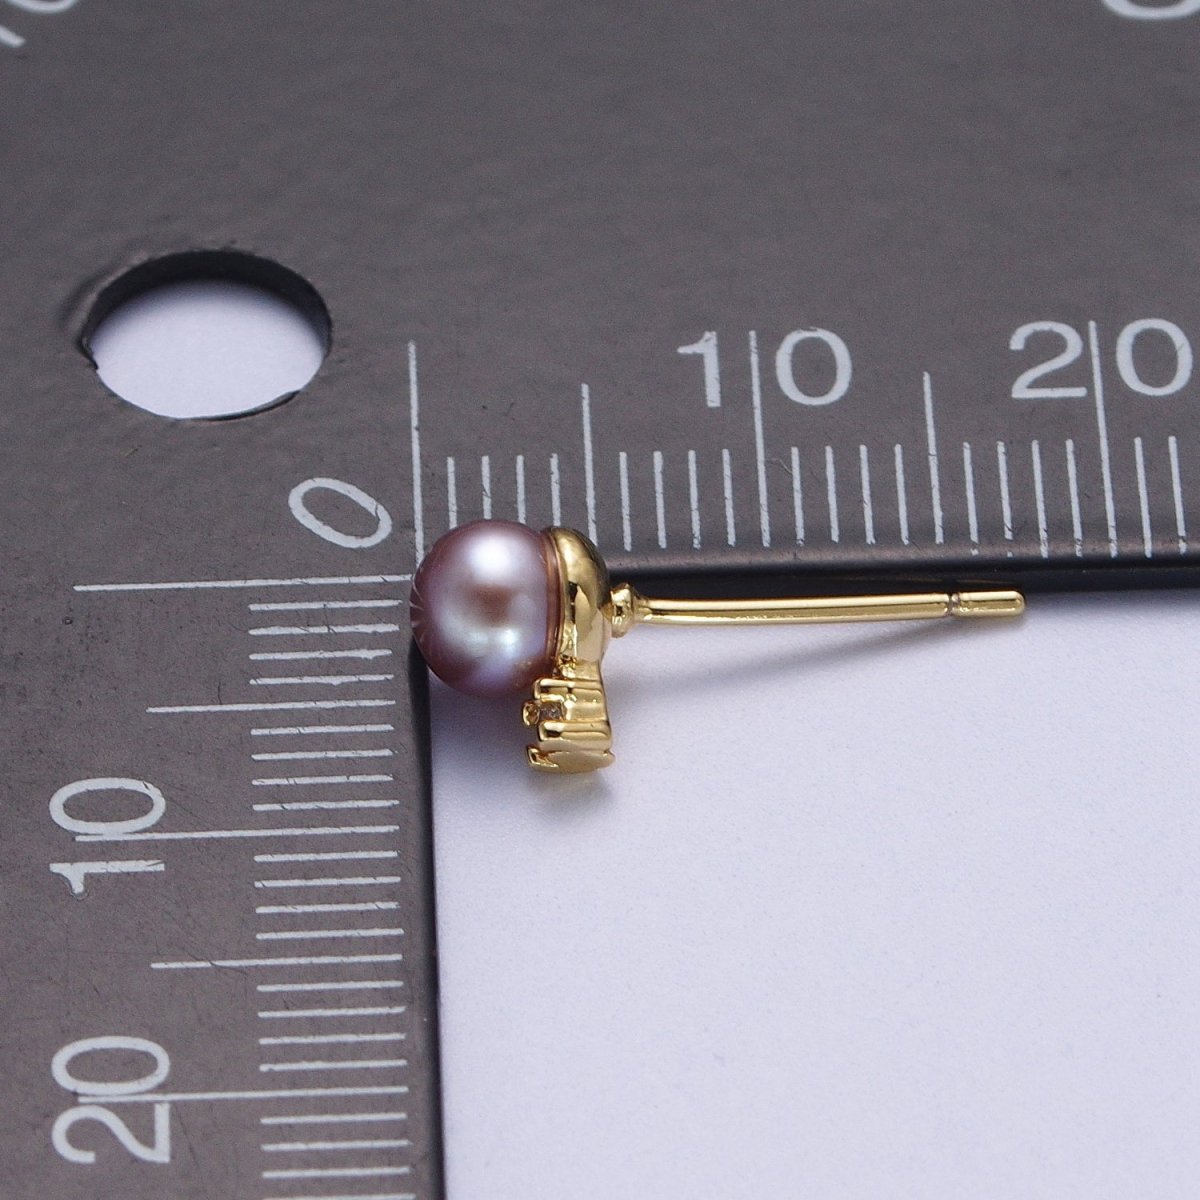 Minimalist Round Purple Shell Pearl Cubic Zirconia Gold Stud Earrings, Gift For Her | Y-040 - DLUXCA